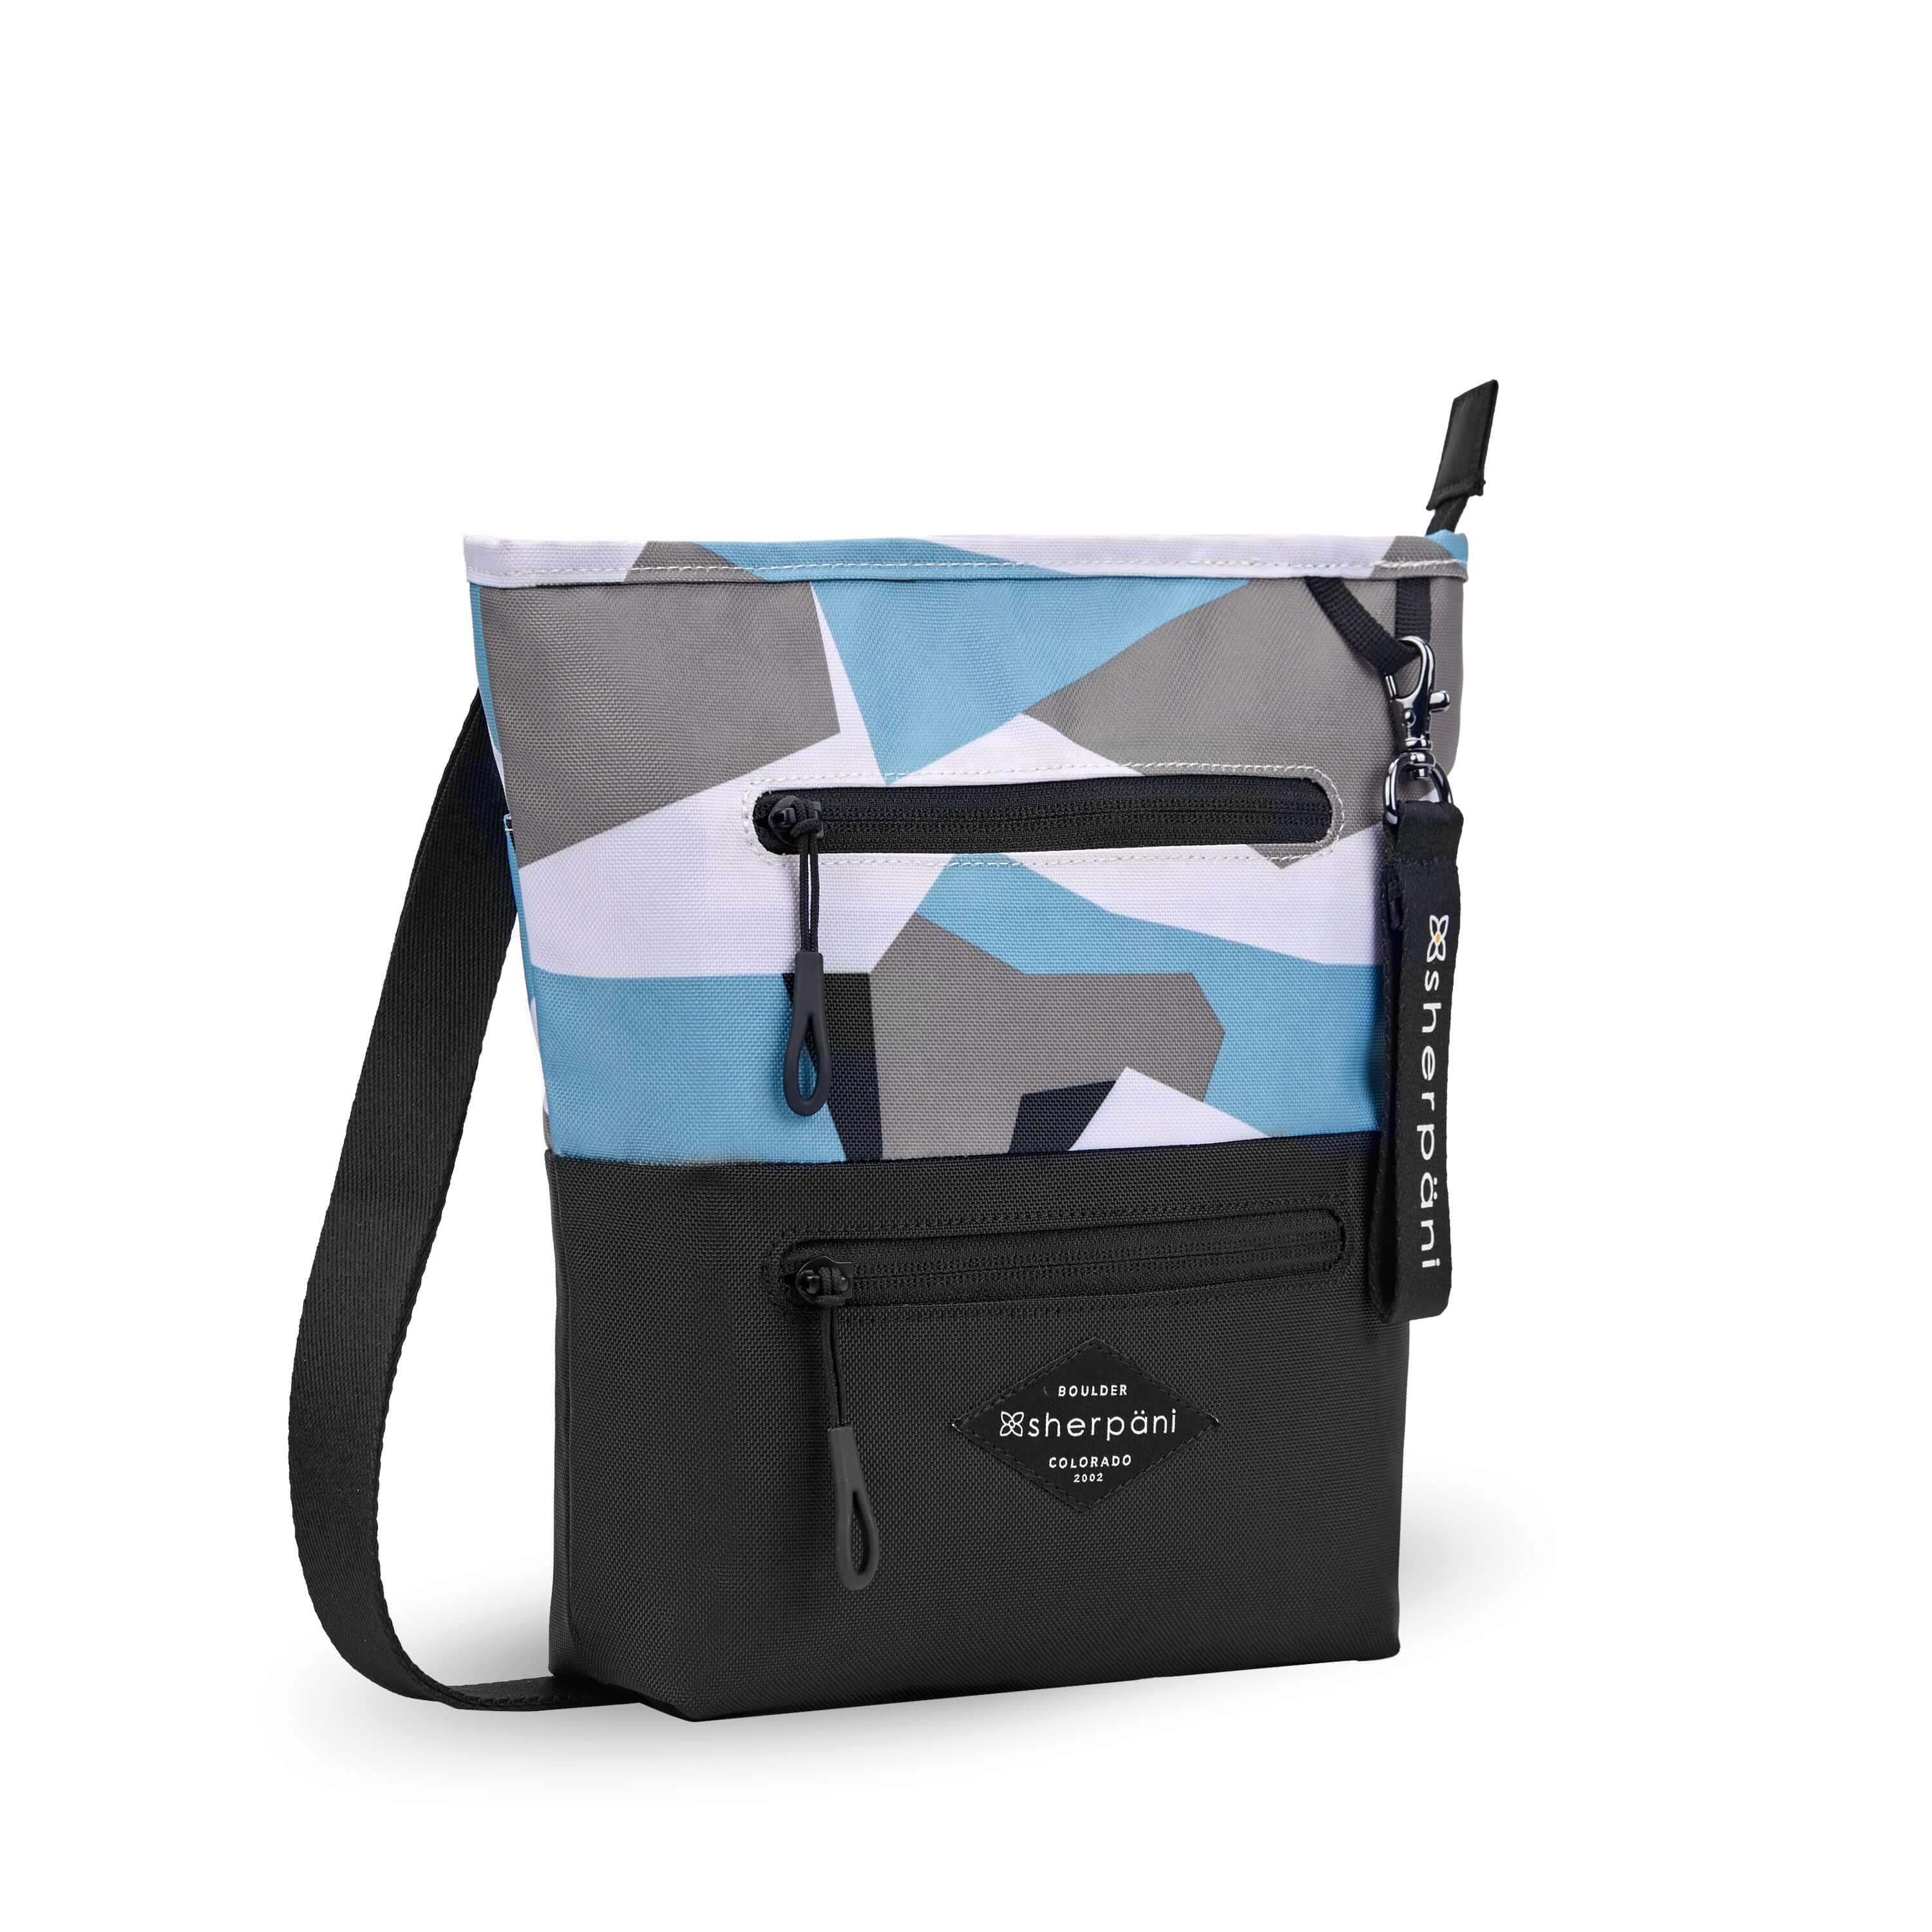 Angled front view of Sherpani’s crossbody, the Sadie, in Summer Camo. The top half of the bag is a camouflage pattern of white, gray and light blue, the bottom half of the bag is black. It features two exterior zipper pockets on the front panel with easy pull zippers accented in black. A Sherpani branded keychain is attached to a fabric loop in the upper right corner. It has an adjustable crossbody strap. 